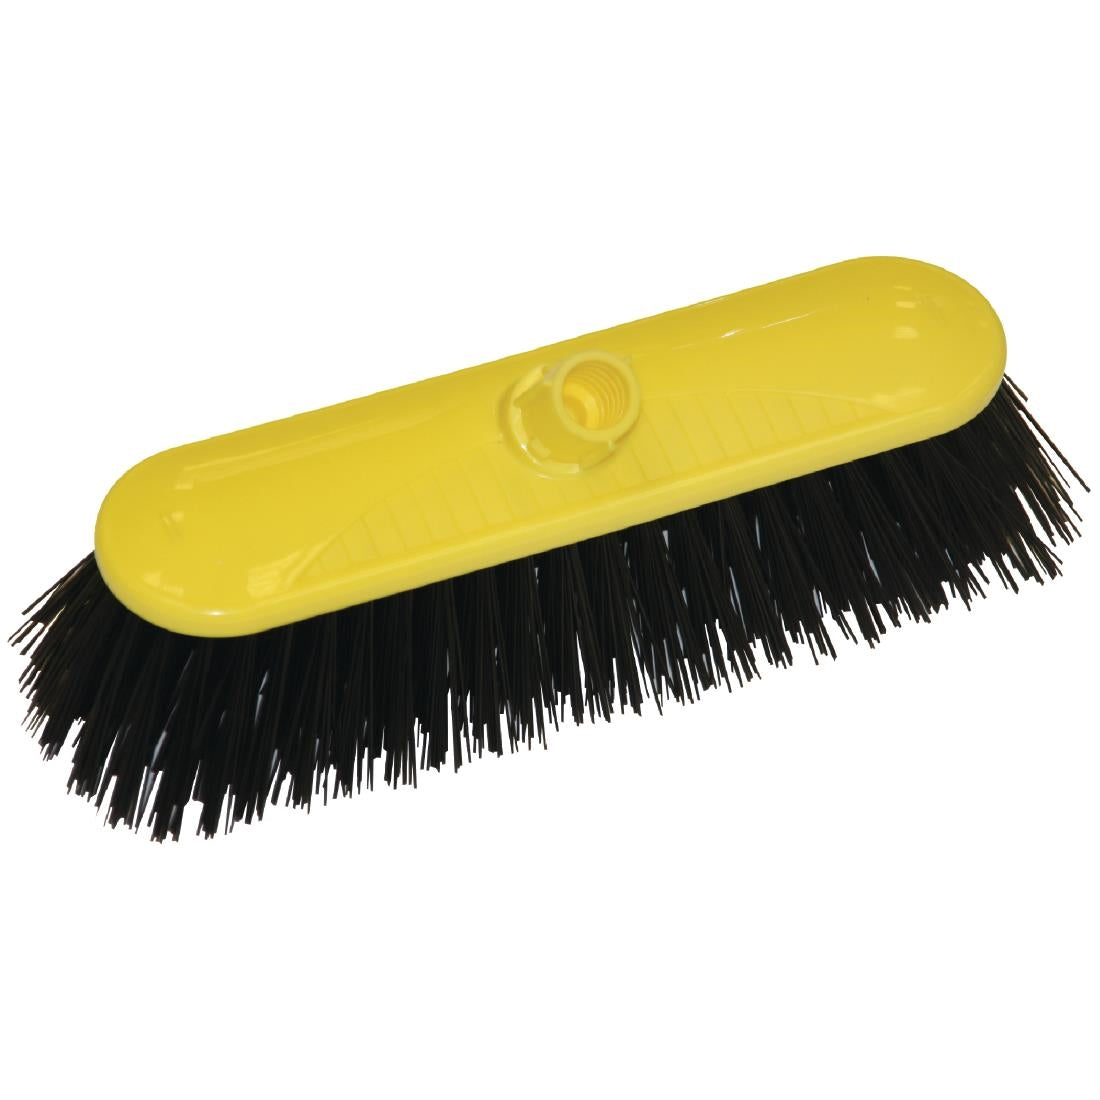 CC084 SYR Contract Broom Head Stiff Bristle Yellow 10.5in JD Catering Equipment Solutions Ltd